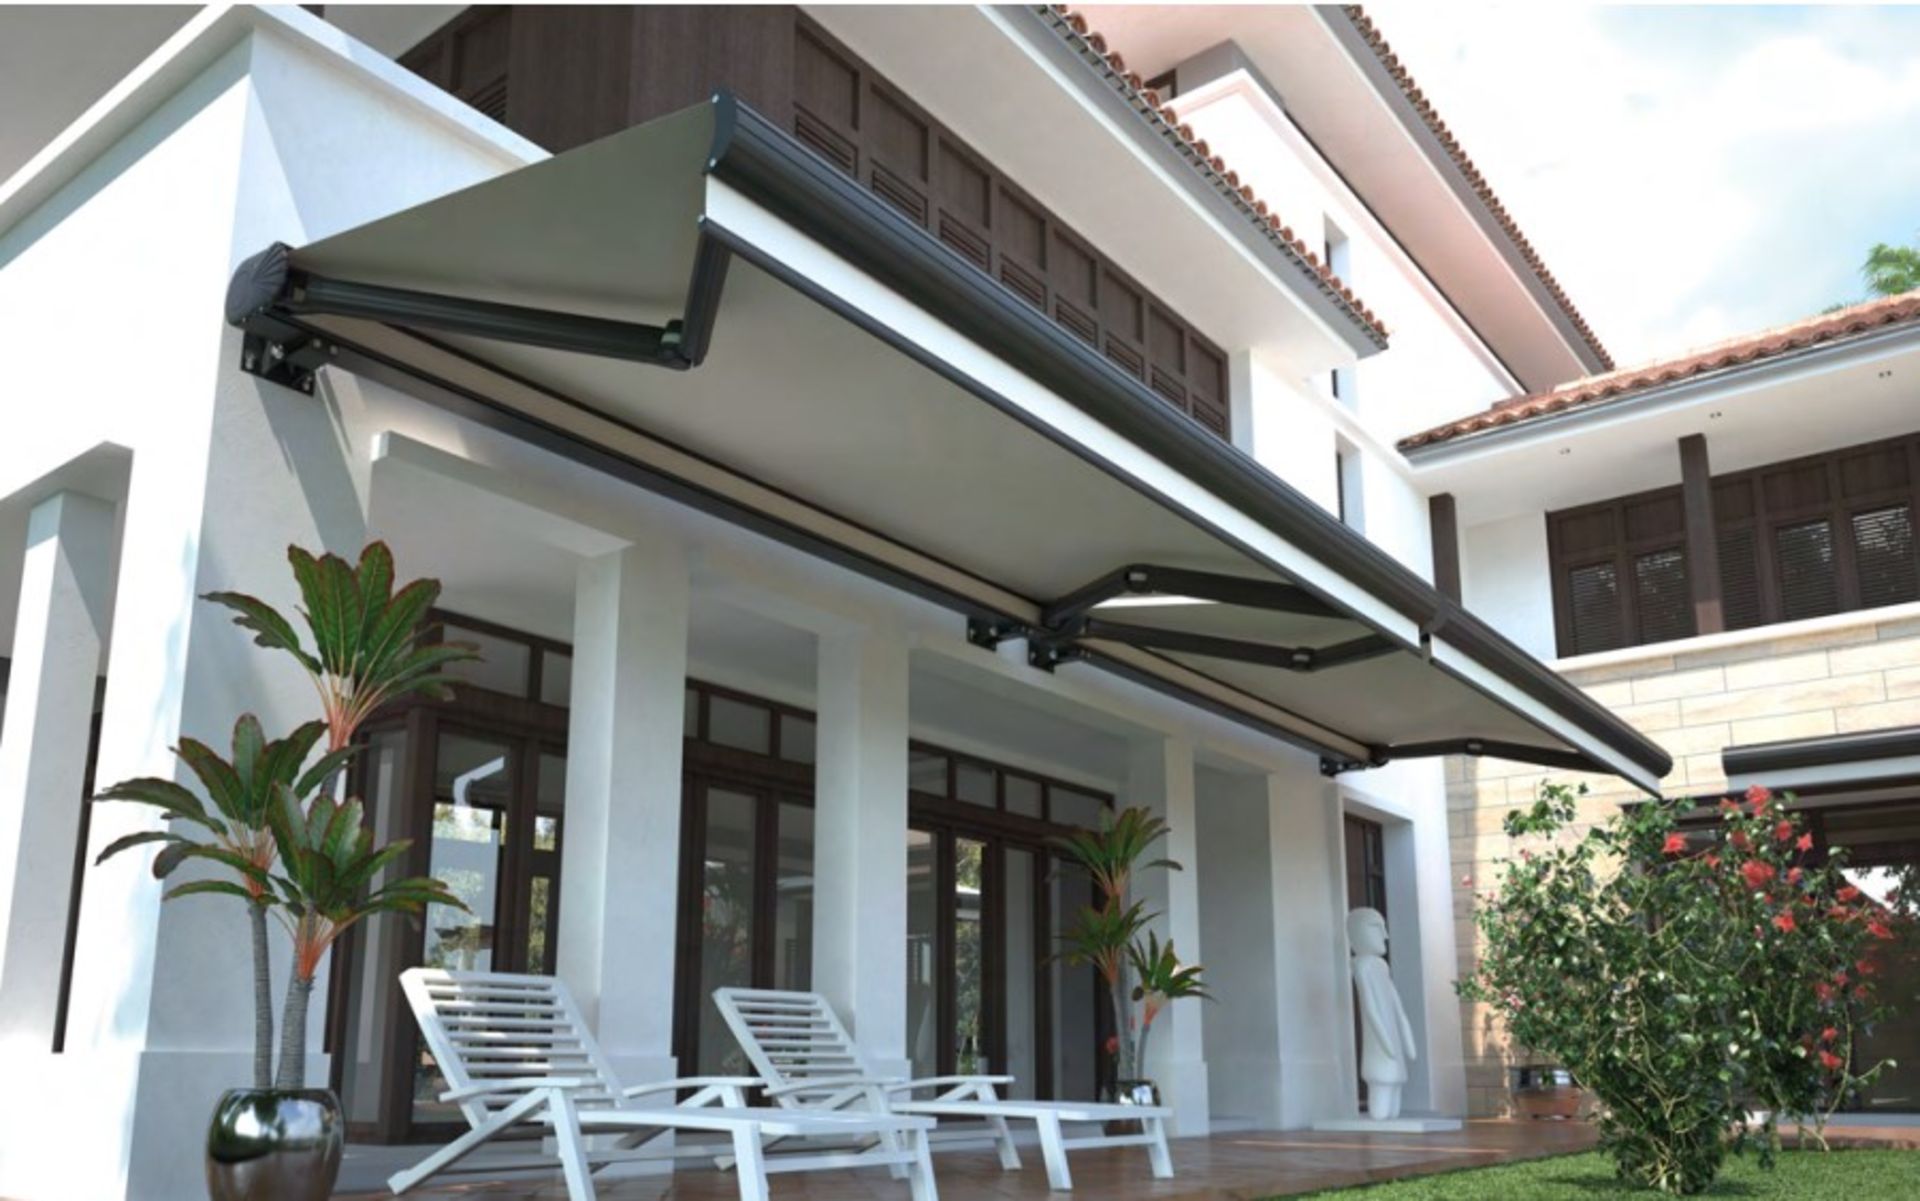 New Orion fully electric Cassette Awning with remote control| 4m width and 3 mtr projection, carcass